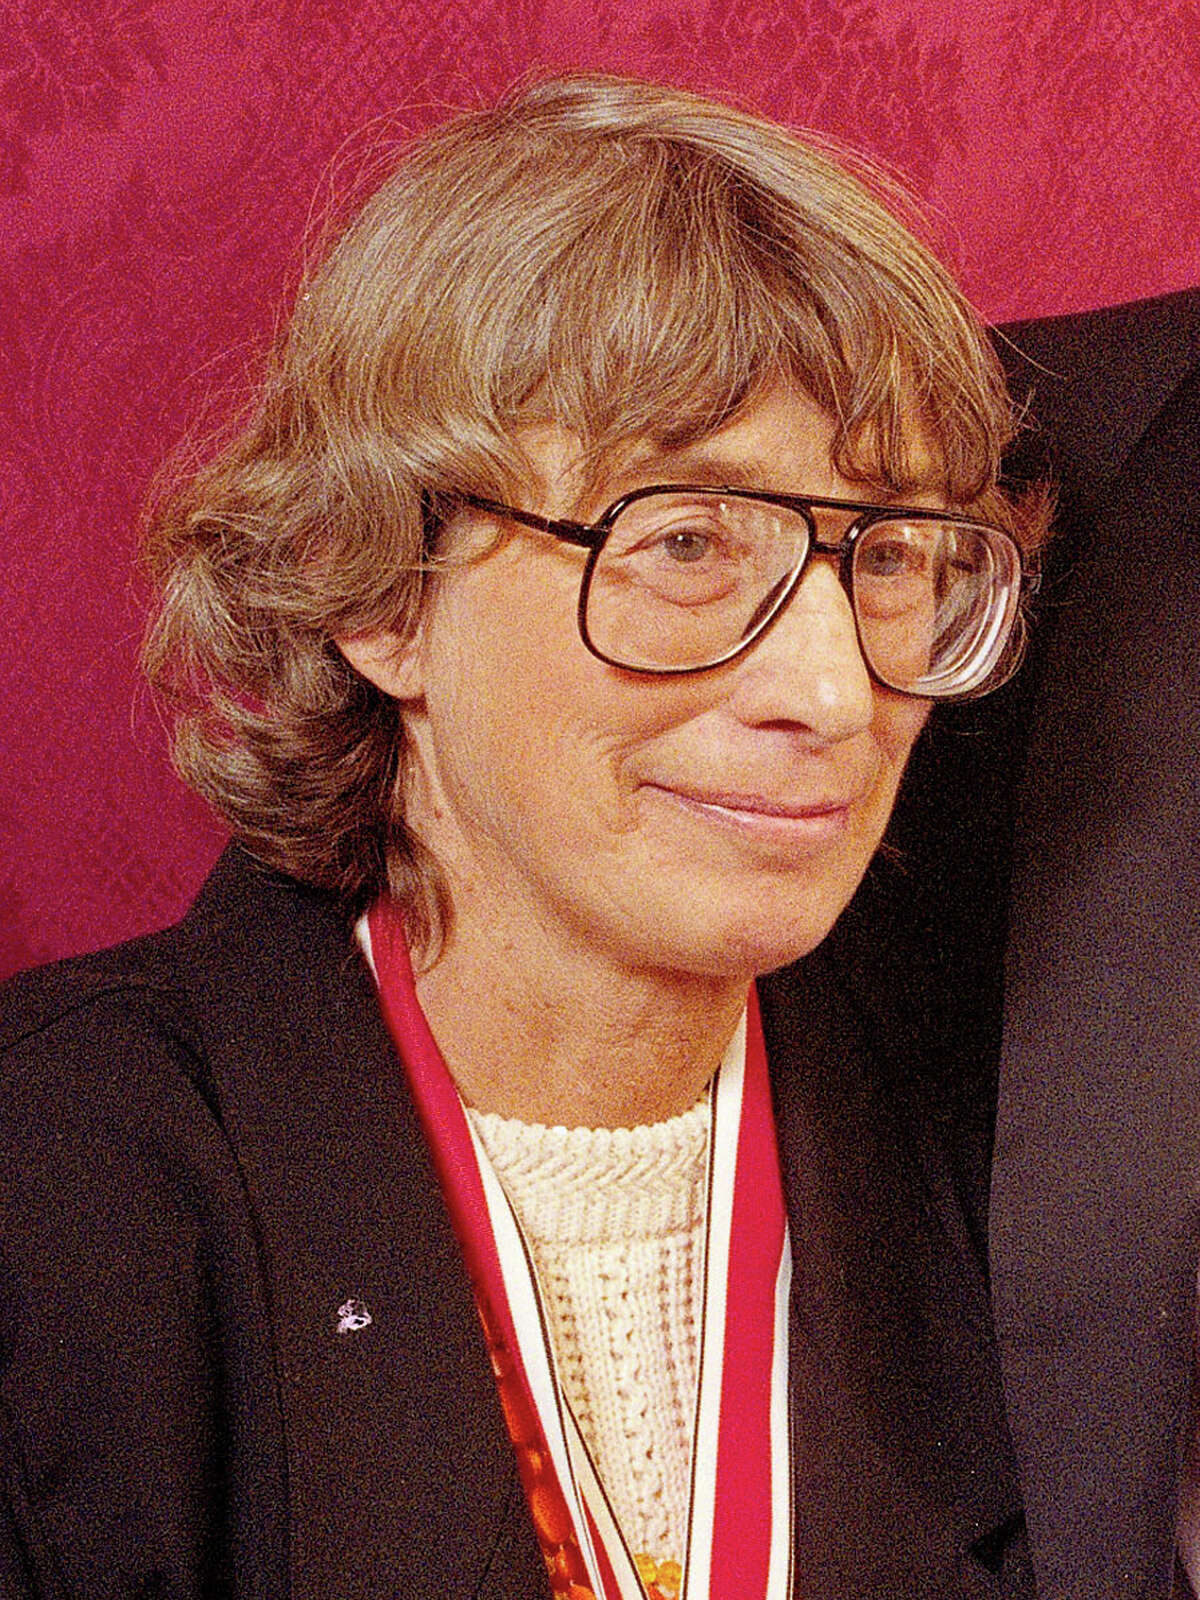 FILE - In this Nov. 18, 1992 file photo, Mary Oliver appears at the National Book Awards in New York where she received the poetry award for her book "New and Selected Poems." Oliver, a Pulitzer Prize-winning poet whose rapturous odes to nature and animal life brought her critical acclaim and popular affection, died Thursday at her home in Hobe Sound, Fla. The case of death was lymphoma. She was 83.